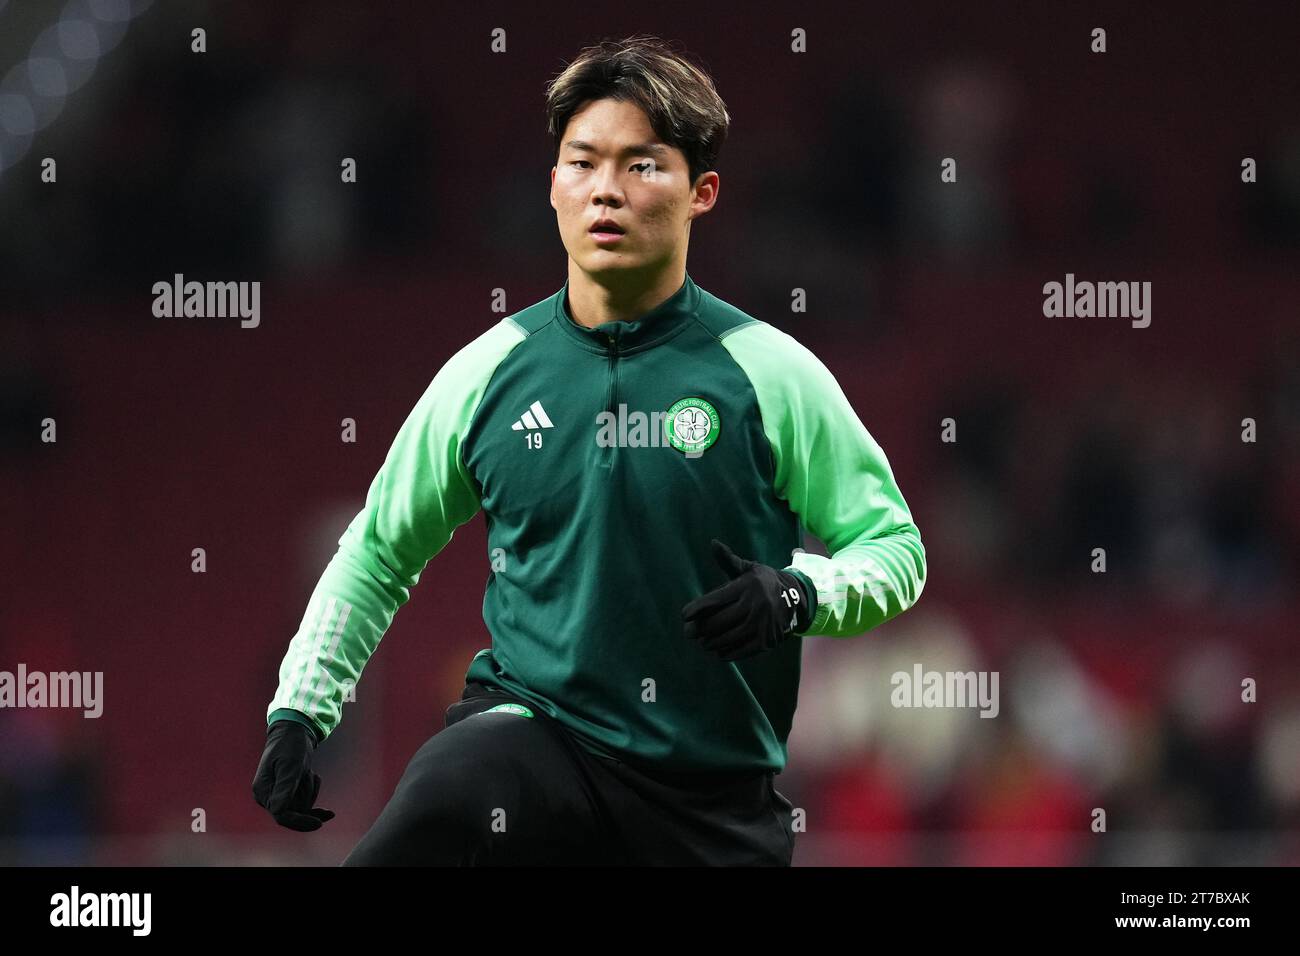 Madrid, Spain. 09th Nov, 2023. Hyeongyu Oh of Celtic FC during the UEFA Champions League match, Group E, between Atletico de Madrid and Celtic FC played at Civitas Mertropolitano Stadium on November 7, 2023 in Madrid, Spain. (Photo by Bagu Blanco/PRESSINPHOTO) Credit: PRESSINPHOTO SPORTS AGENCY/Alamy Live News Stock Photo